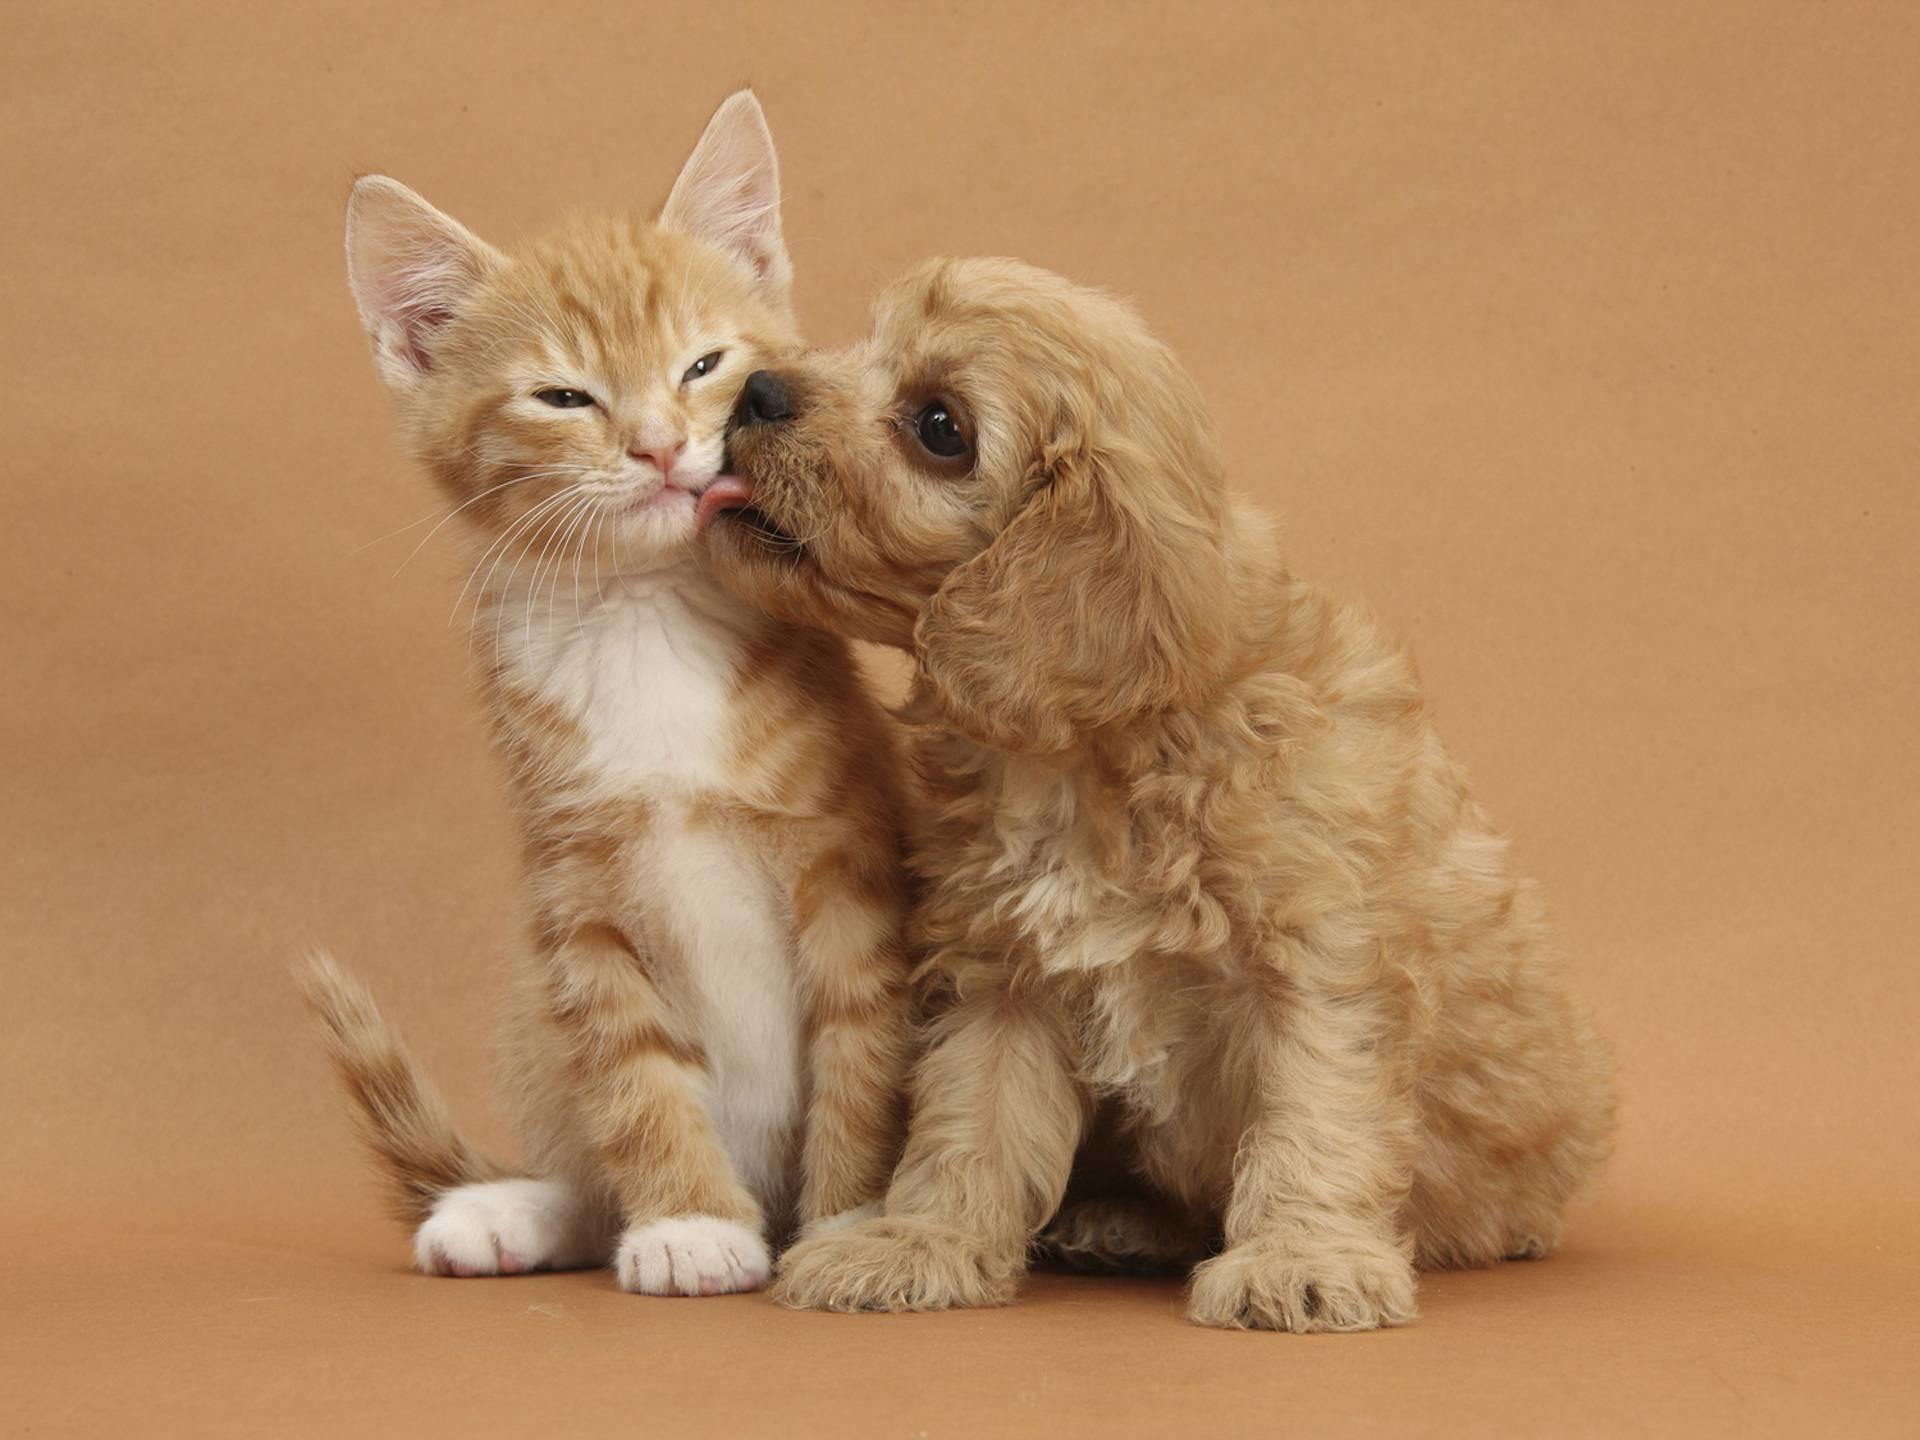 funny dog and cat wallpaper